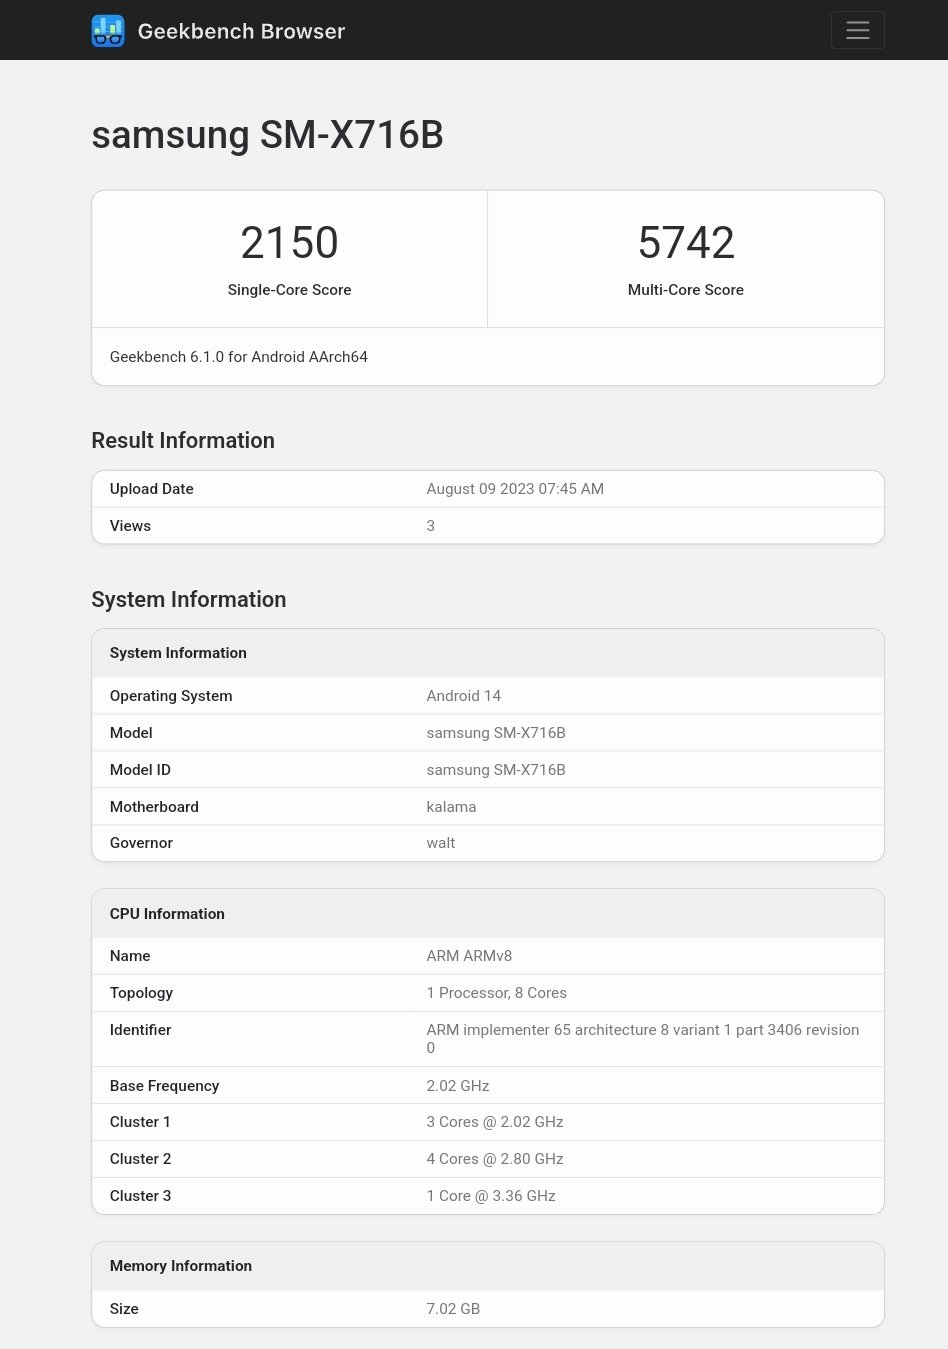 Galaxy Tab S9 5G with One UI 6 spotted on Geekbench